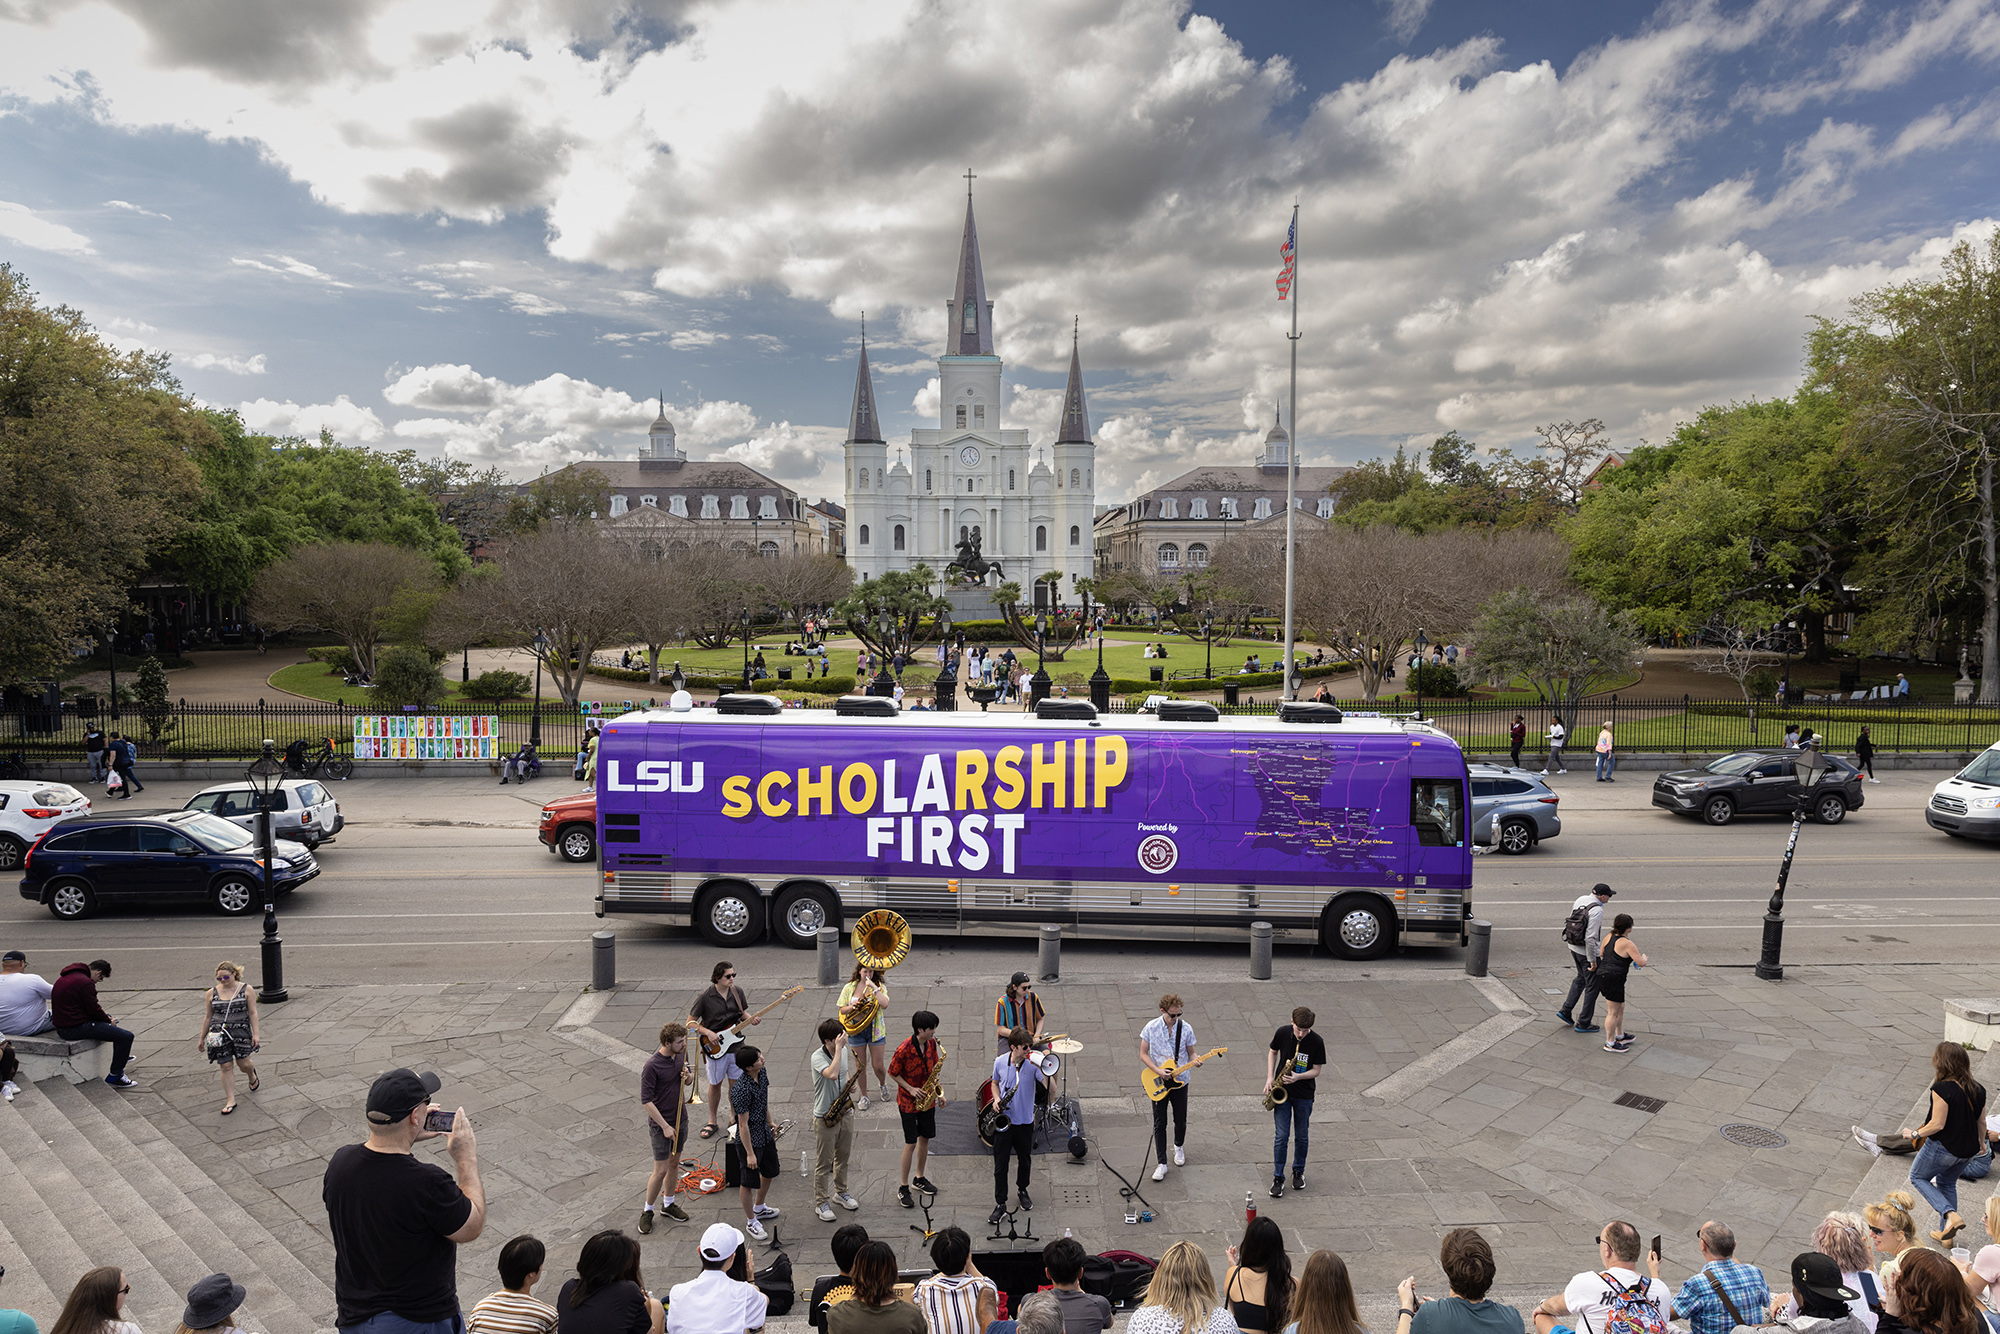 Scholarship First tour bus in New Orleans